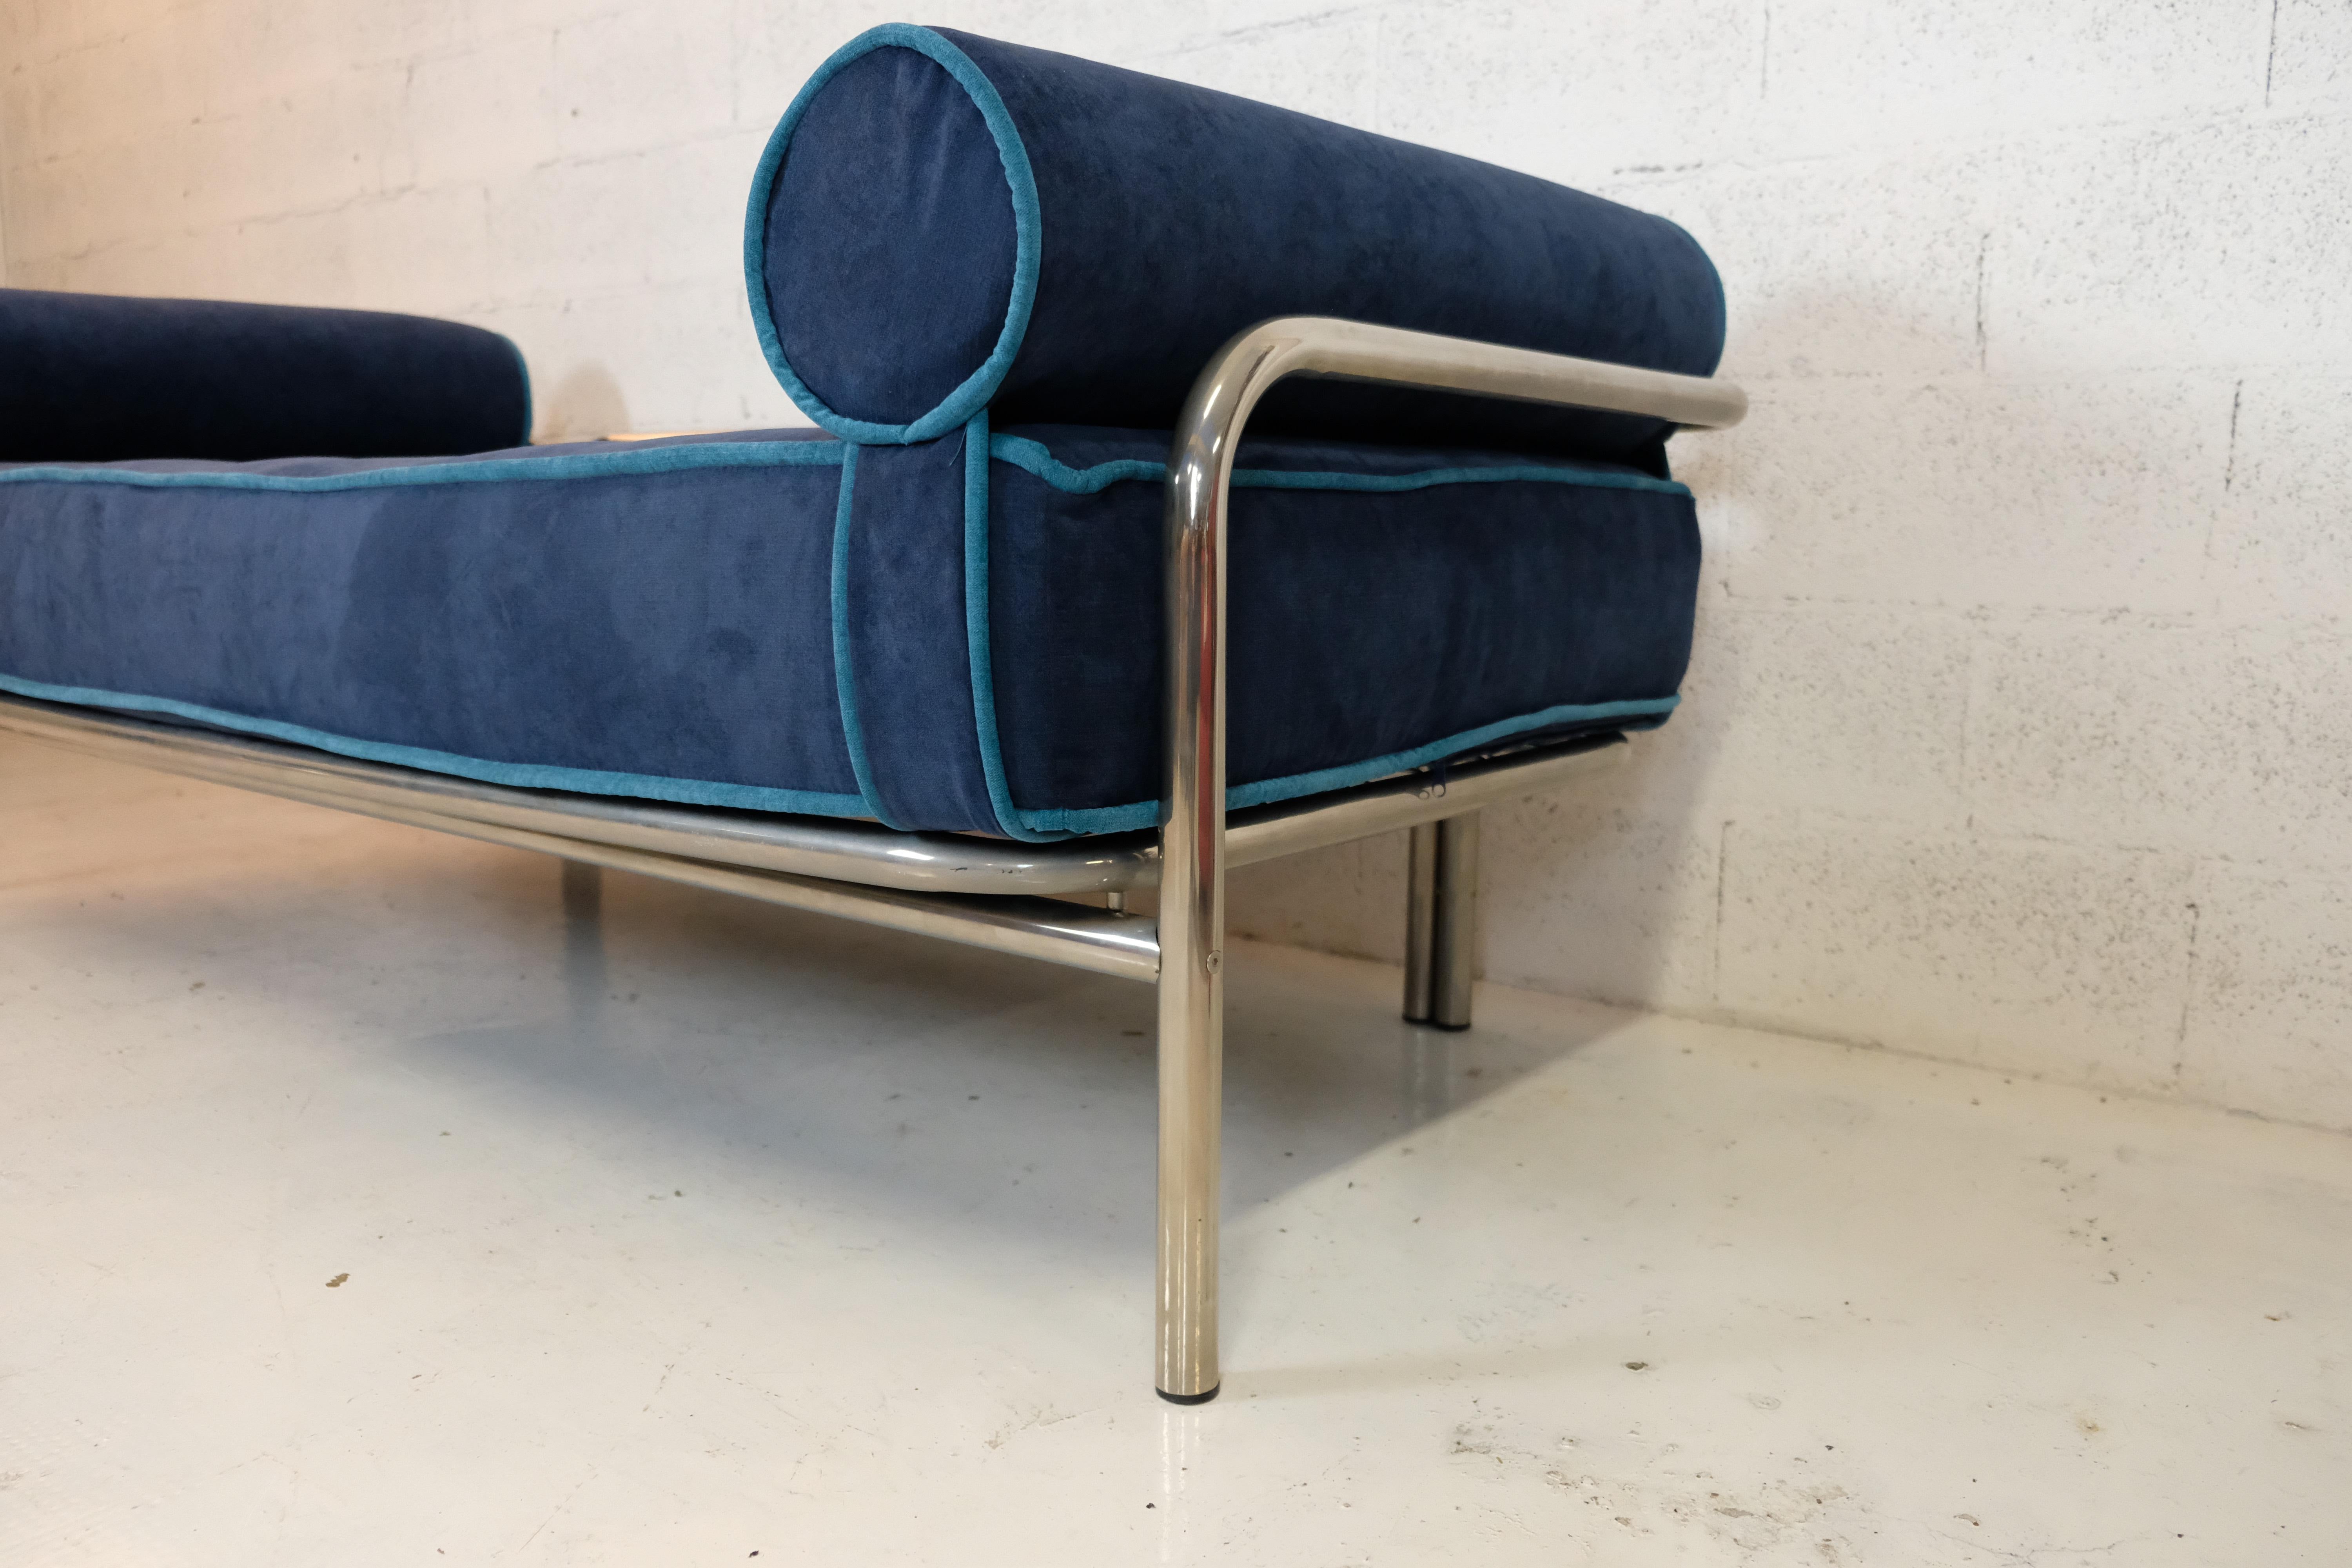 Italian Locus Solus daybed by Gae Aulenti for Poltronova 60s, 70s For Sale